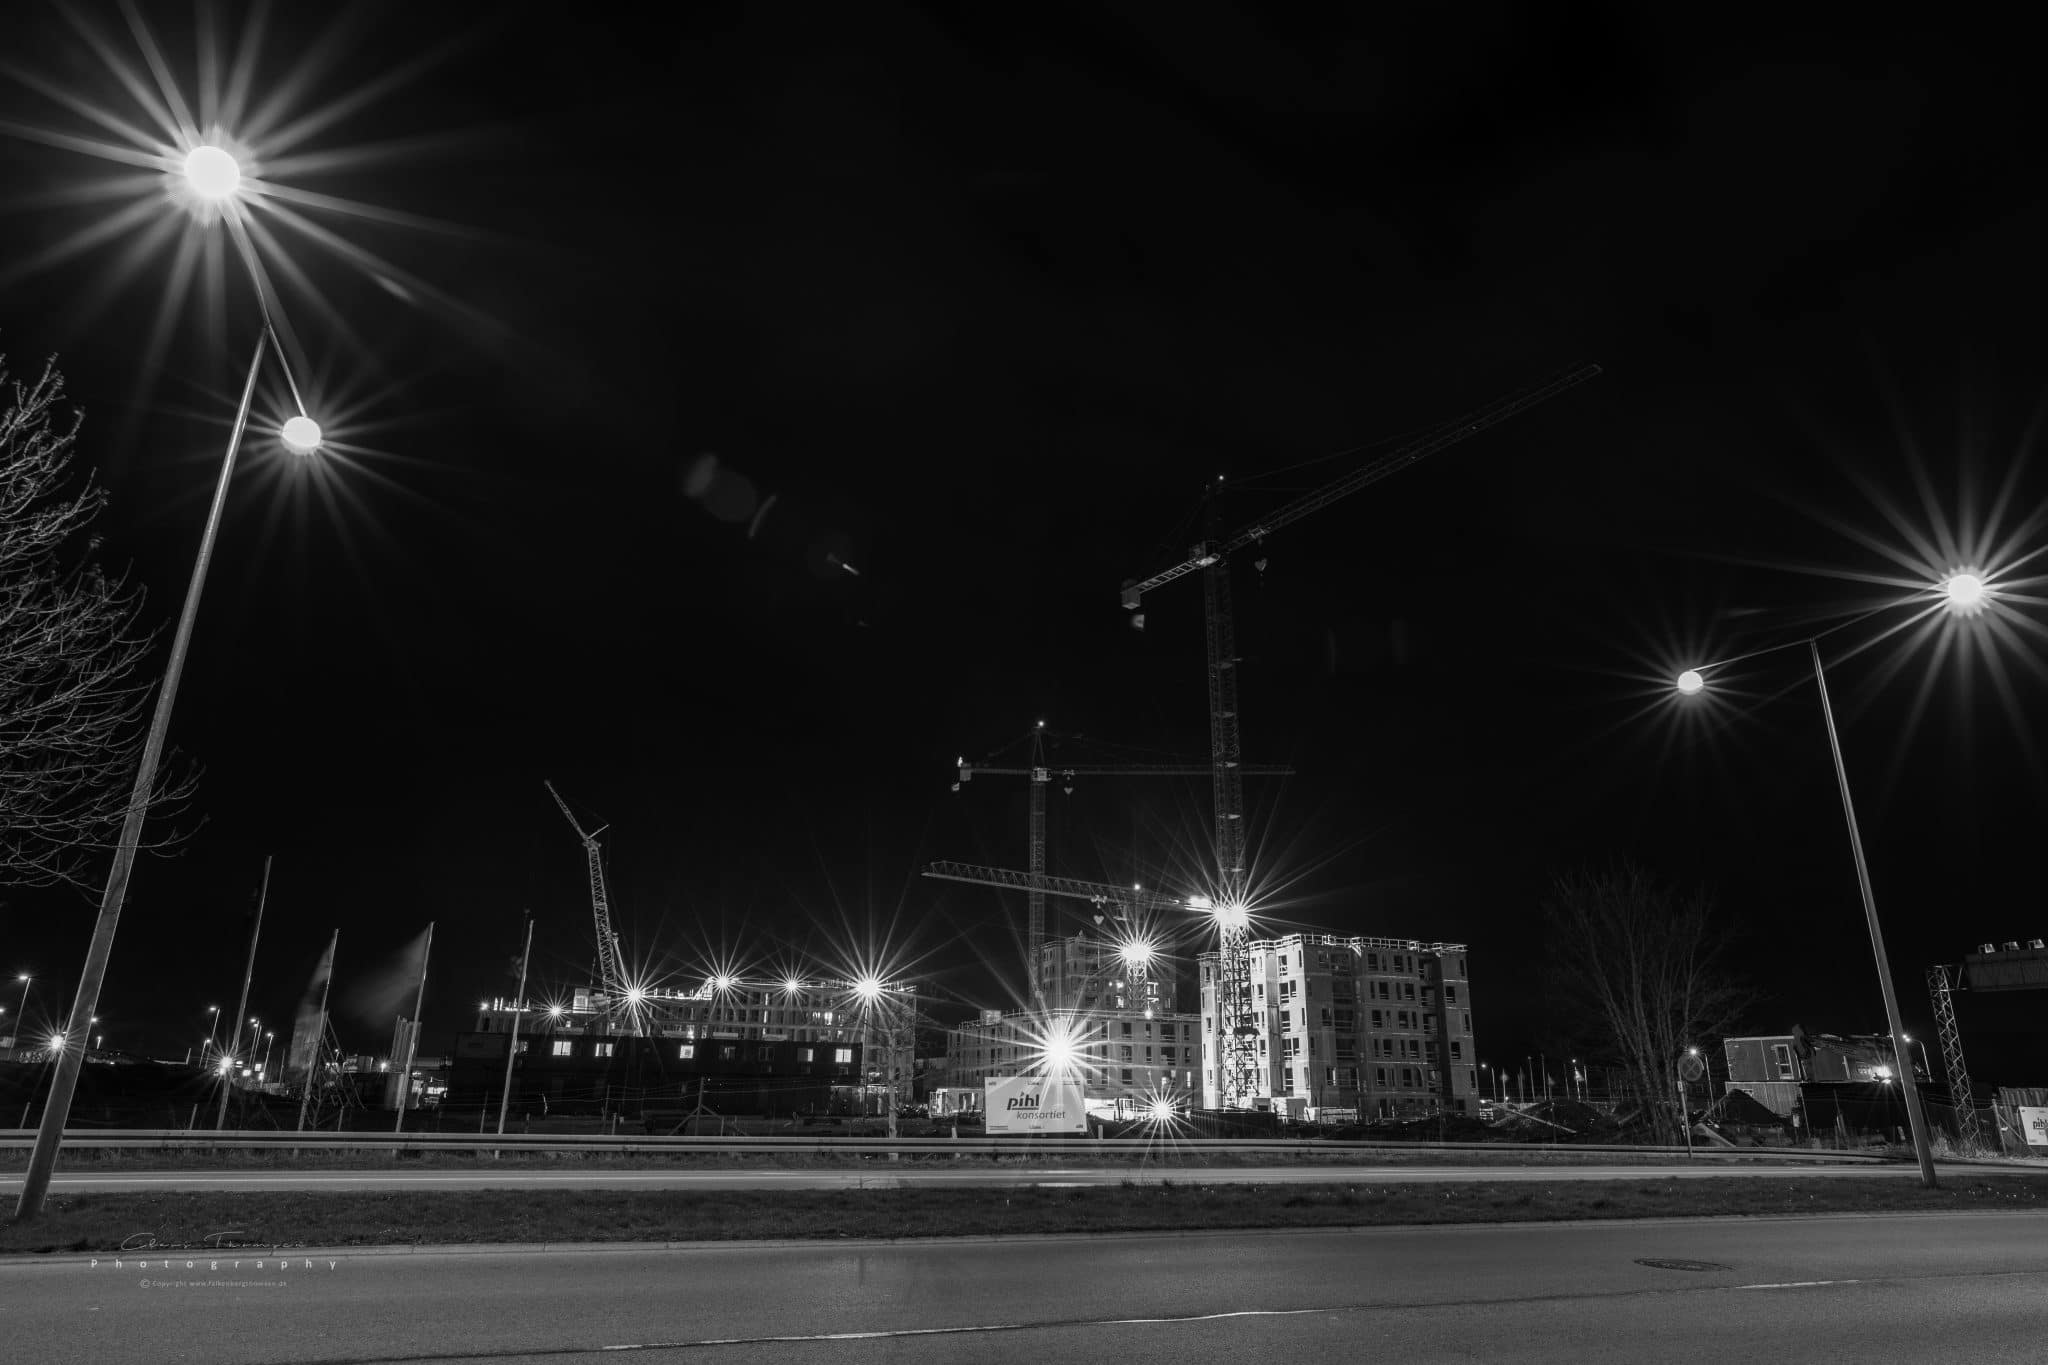 Photograph of the building site 'Frederiksbro' in Hillerød with the Pihl consortium as a total supplier.